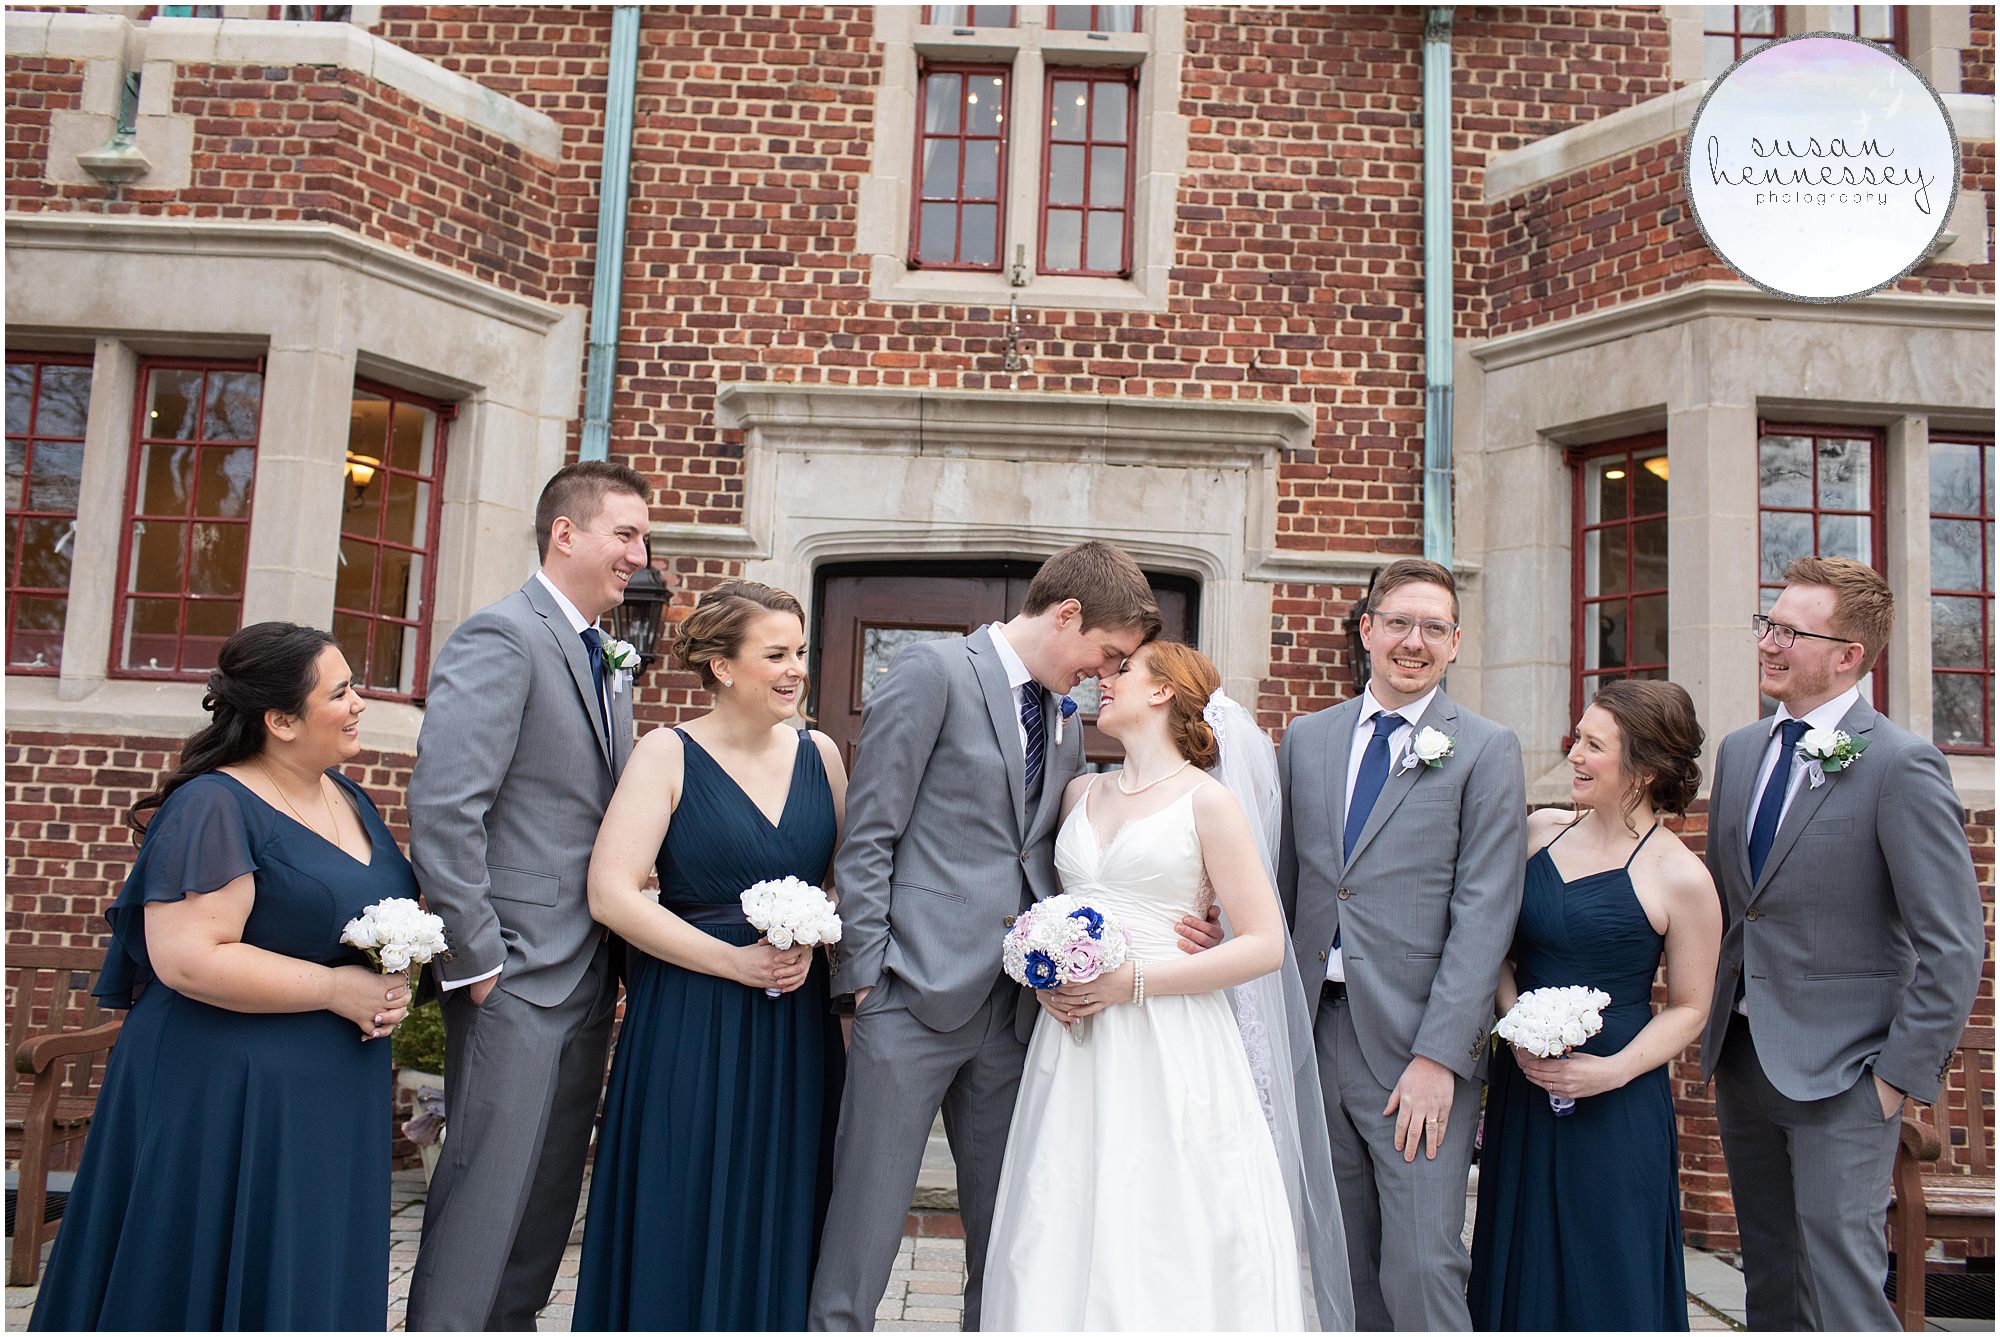 A fun bridal party in navy blue and gray at winter wedding